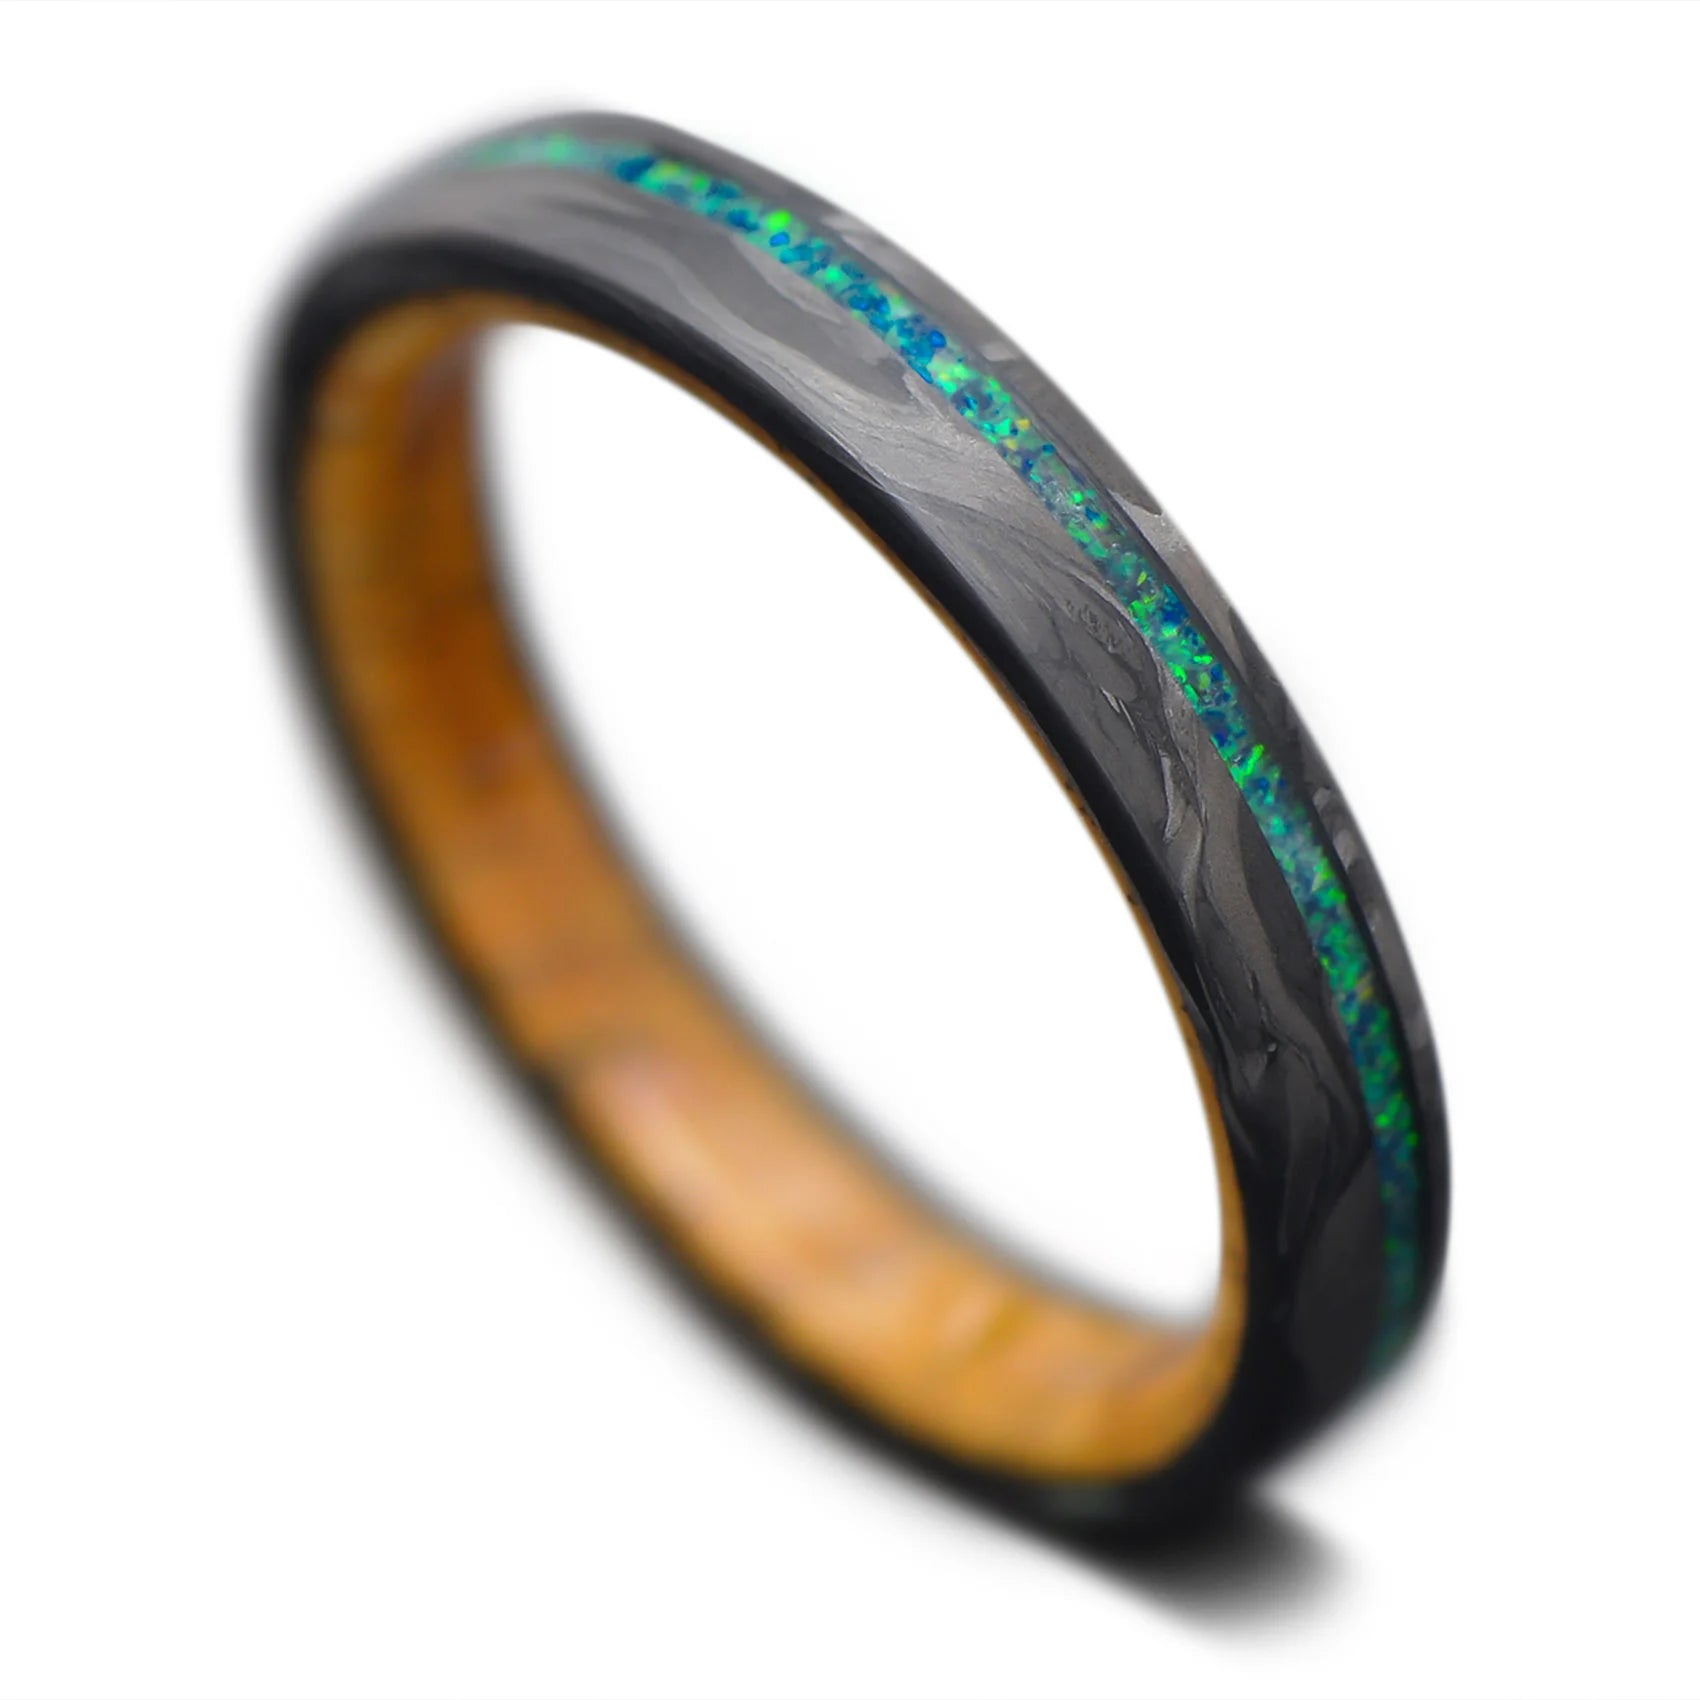 Carbon Fiber ring with emerald opal inlay and Spalted birch wood inner sleeve